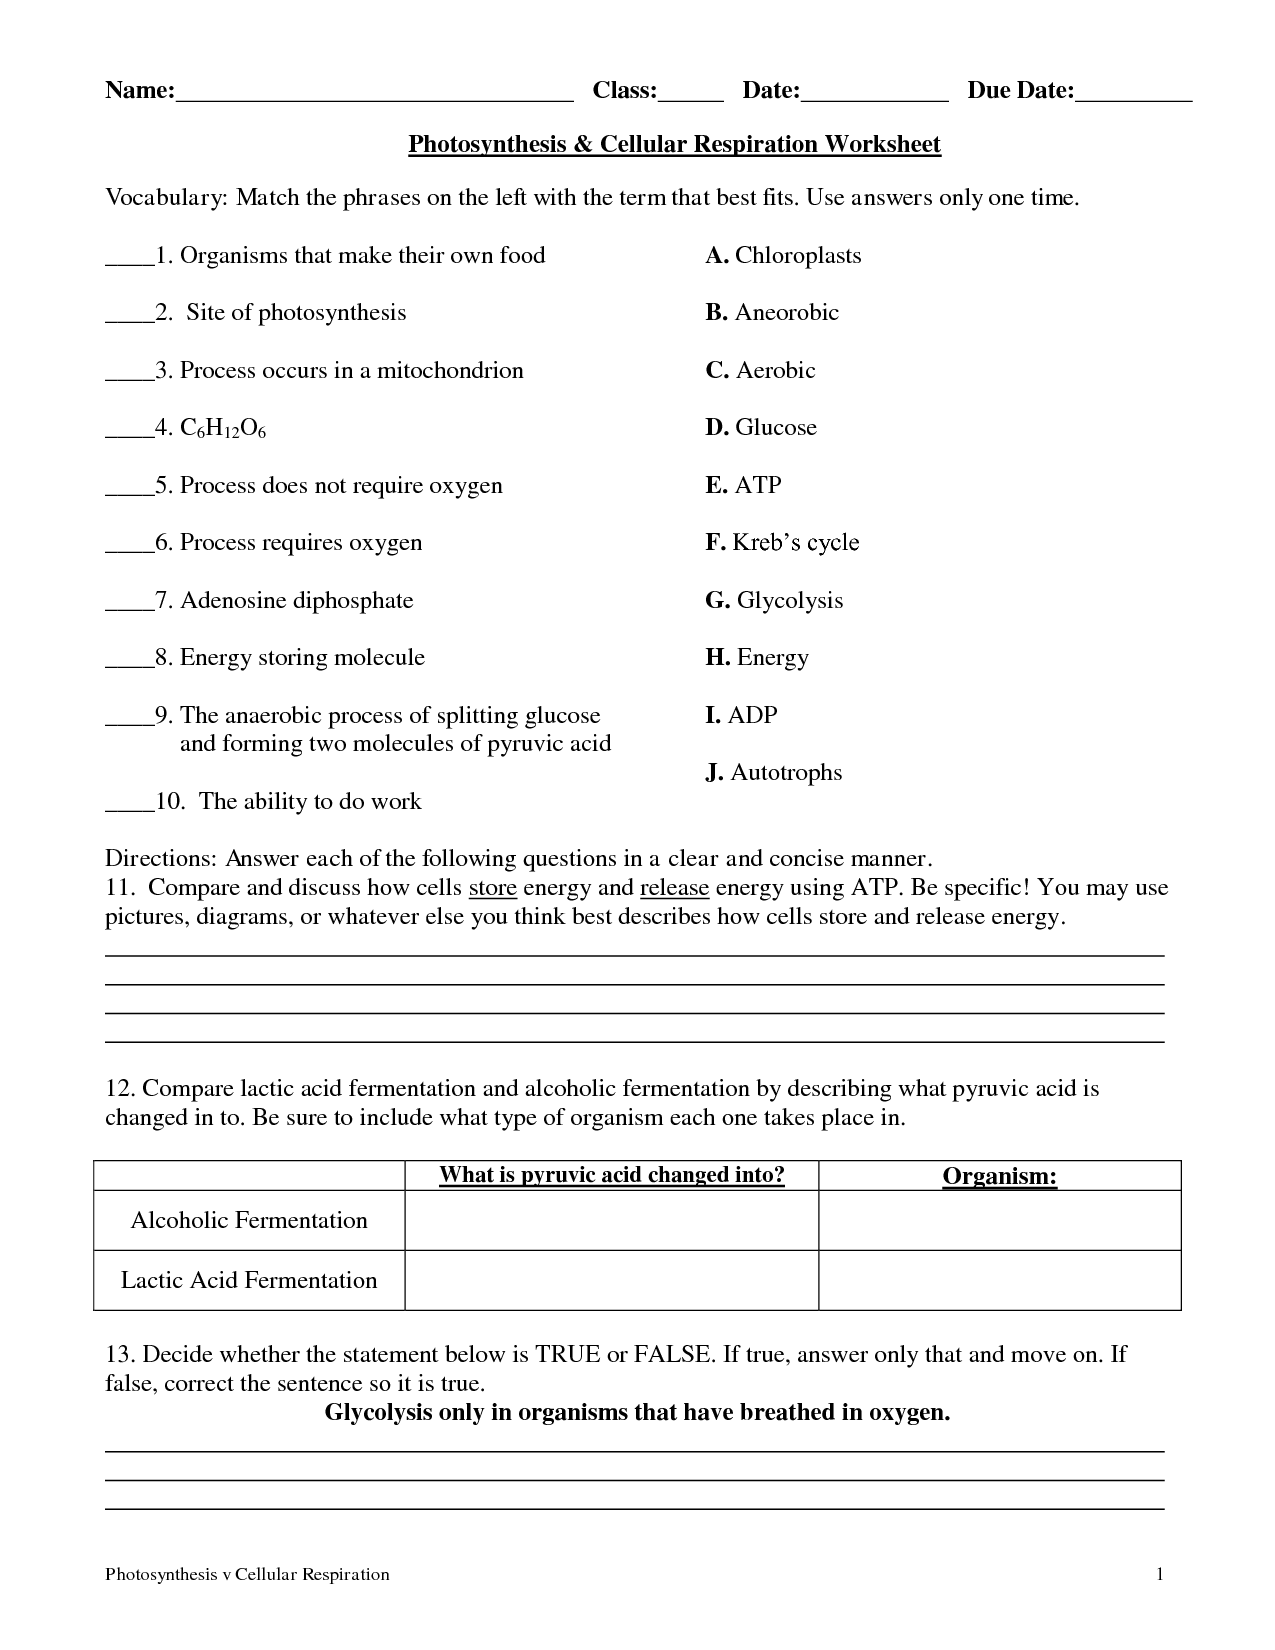 Photosynthesis and Cellular Respiration Worksheet Answers Image